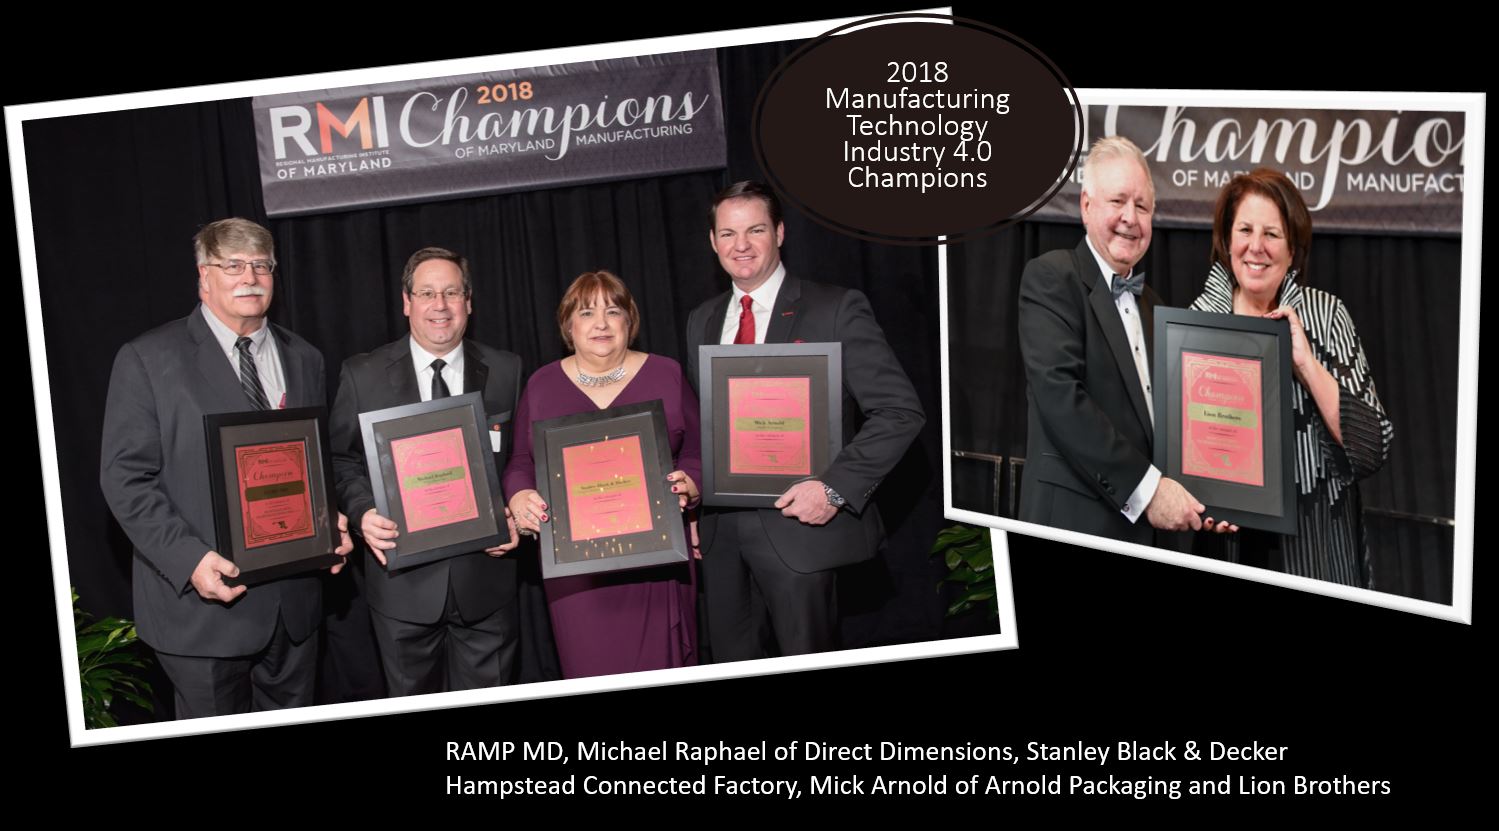 2018 Manufacturing Technology Industry 4.0 Champions: RAMP MD, Michael Raphael of Direct Dimensions, Stanley Black & Decker Hampstead Connected Factory, Mick Arnold of Arnold Packaging and Lion Brothers